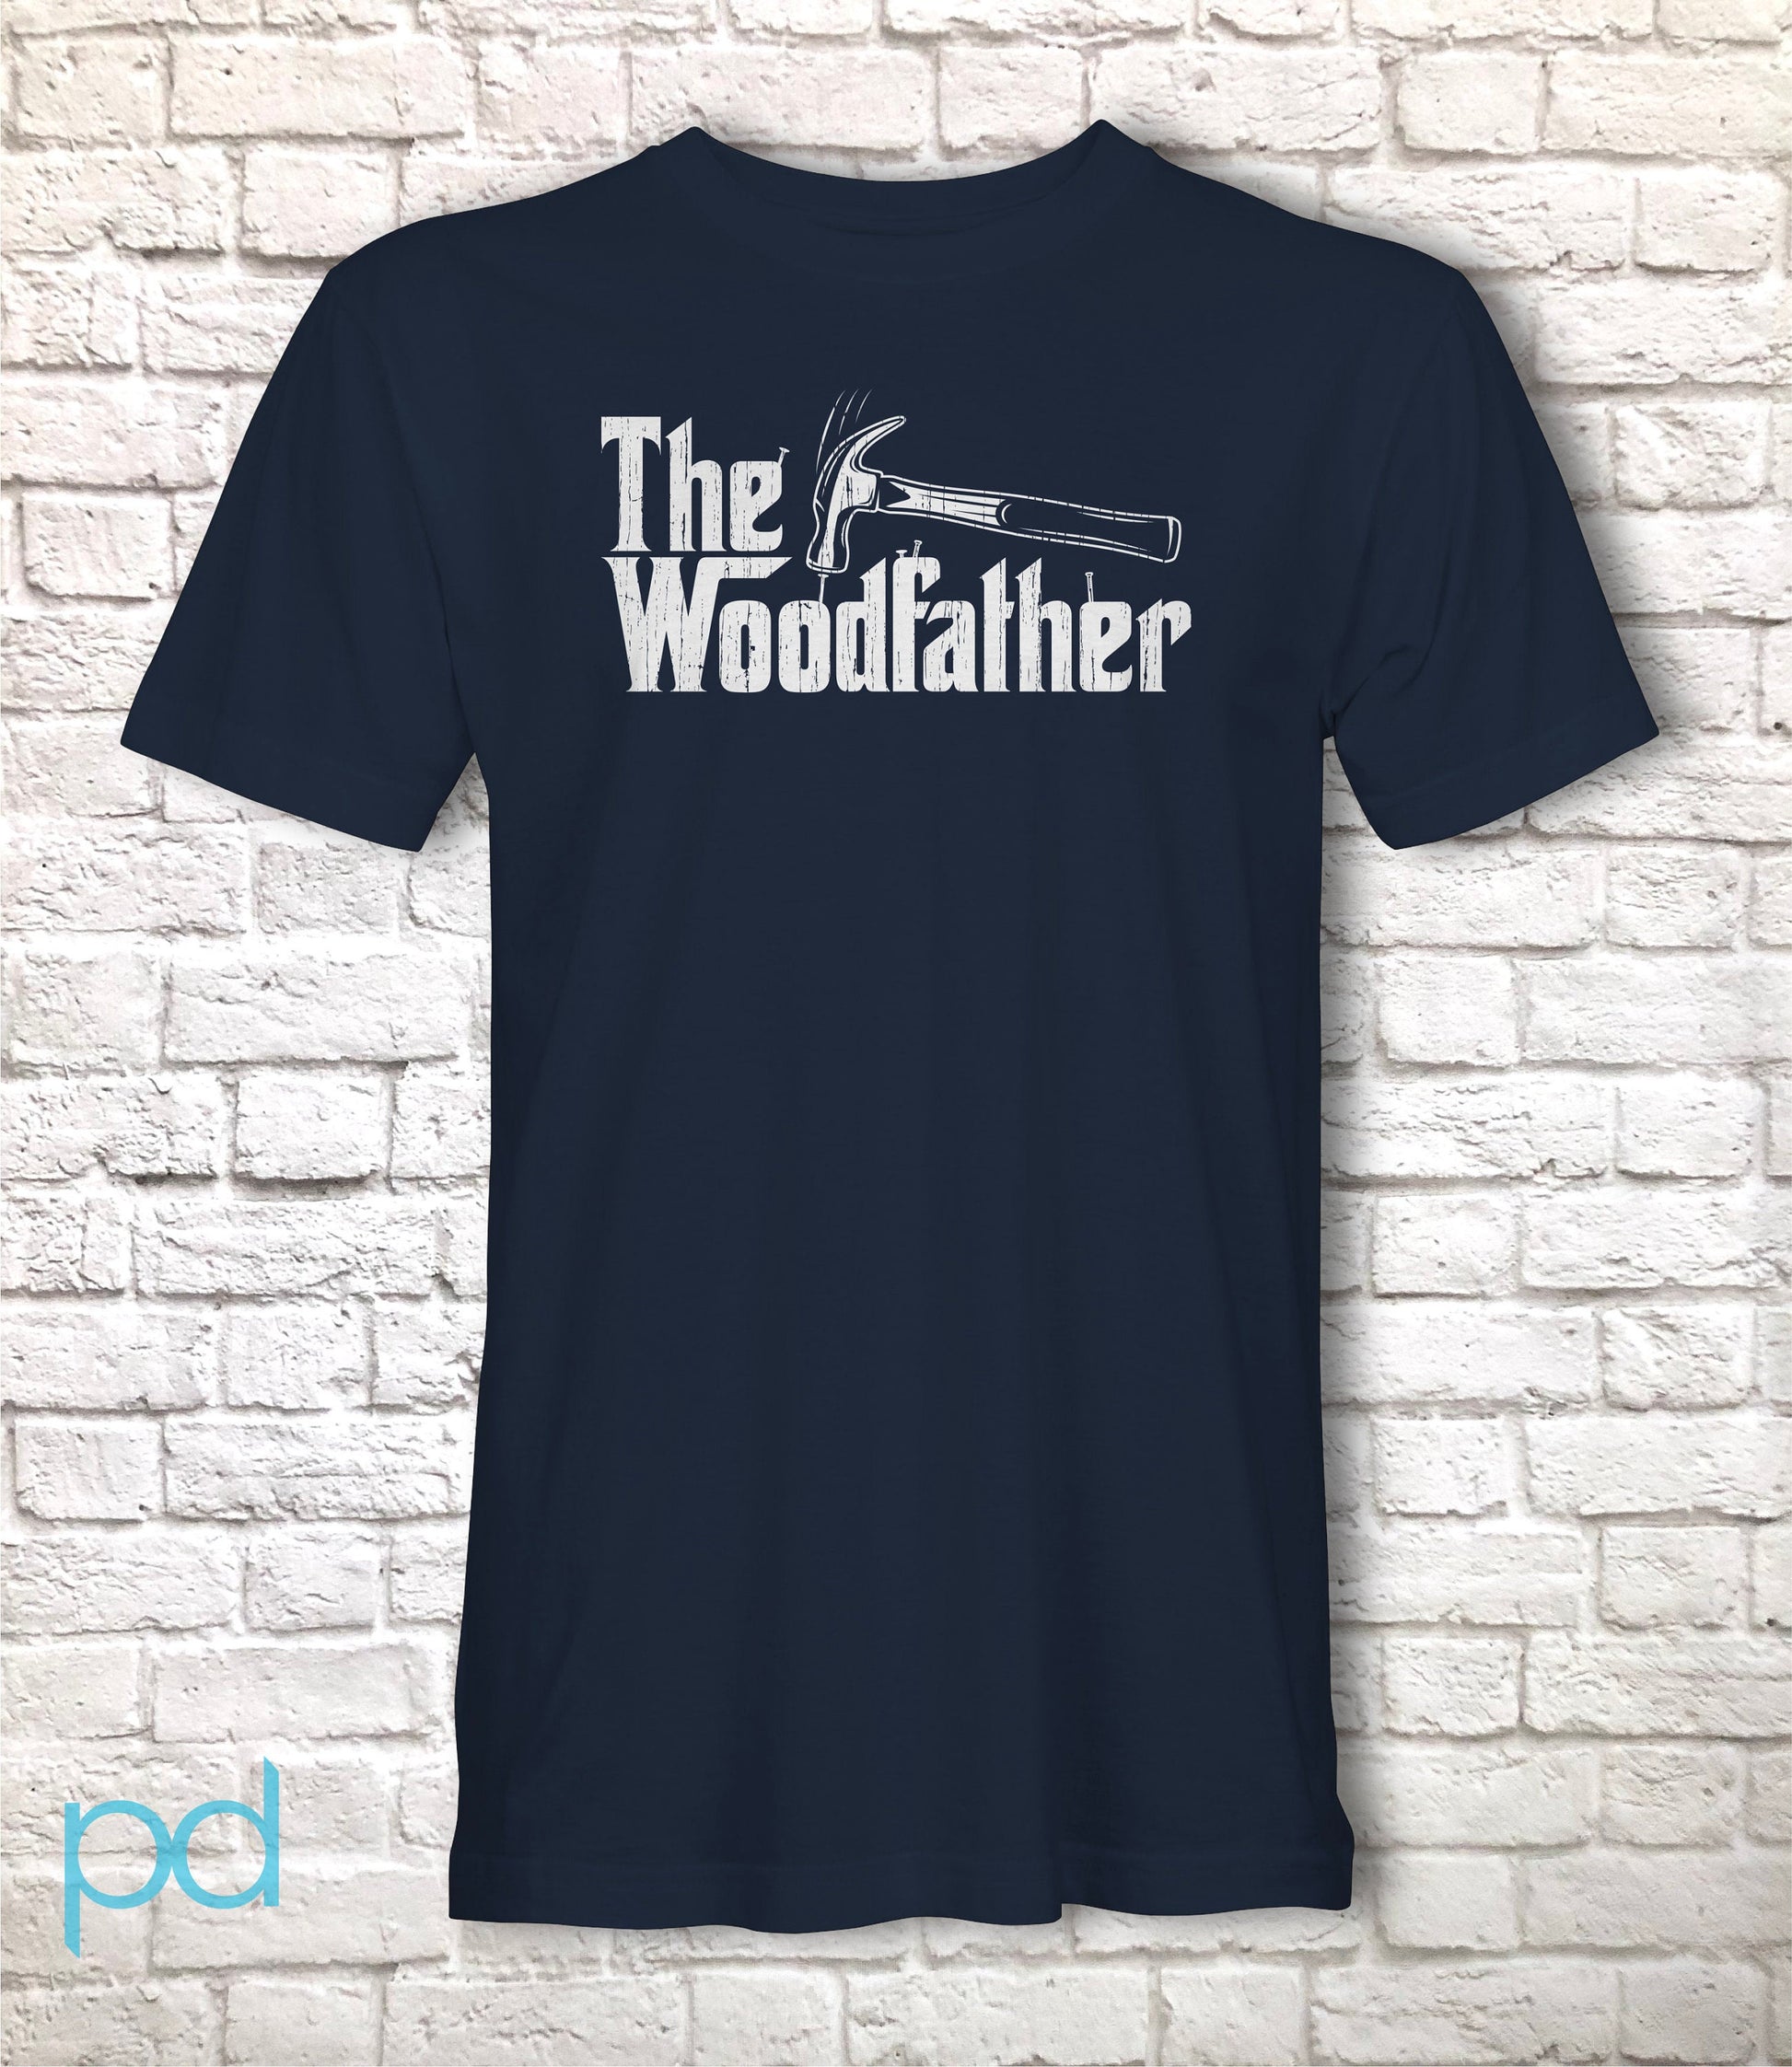 Funny Carpenter T-Shirt, Woodfather Parody Gift Idea, Humorous Woodworking Joiner Tee Shirt T Top, Hammer & Nails